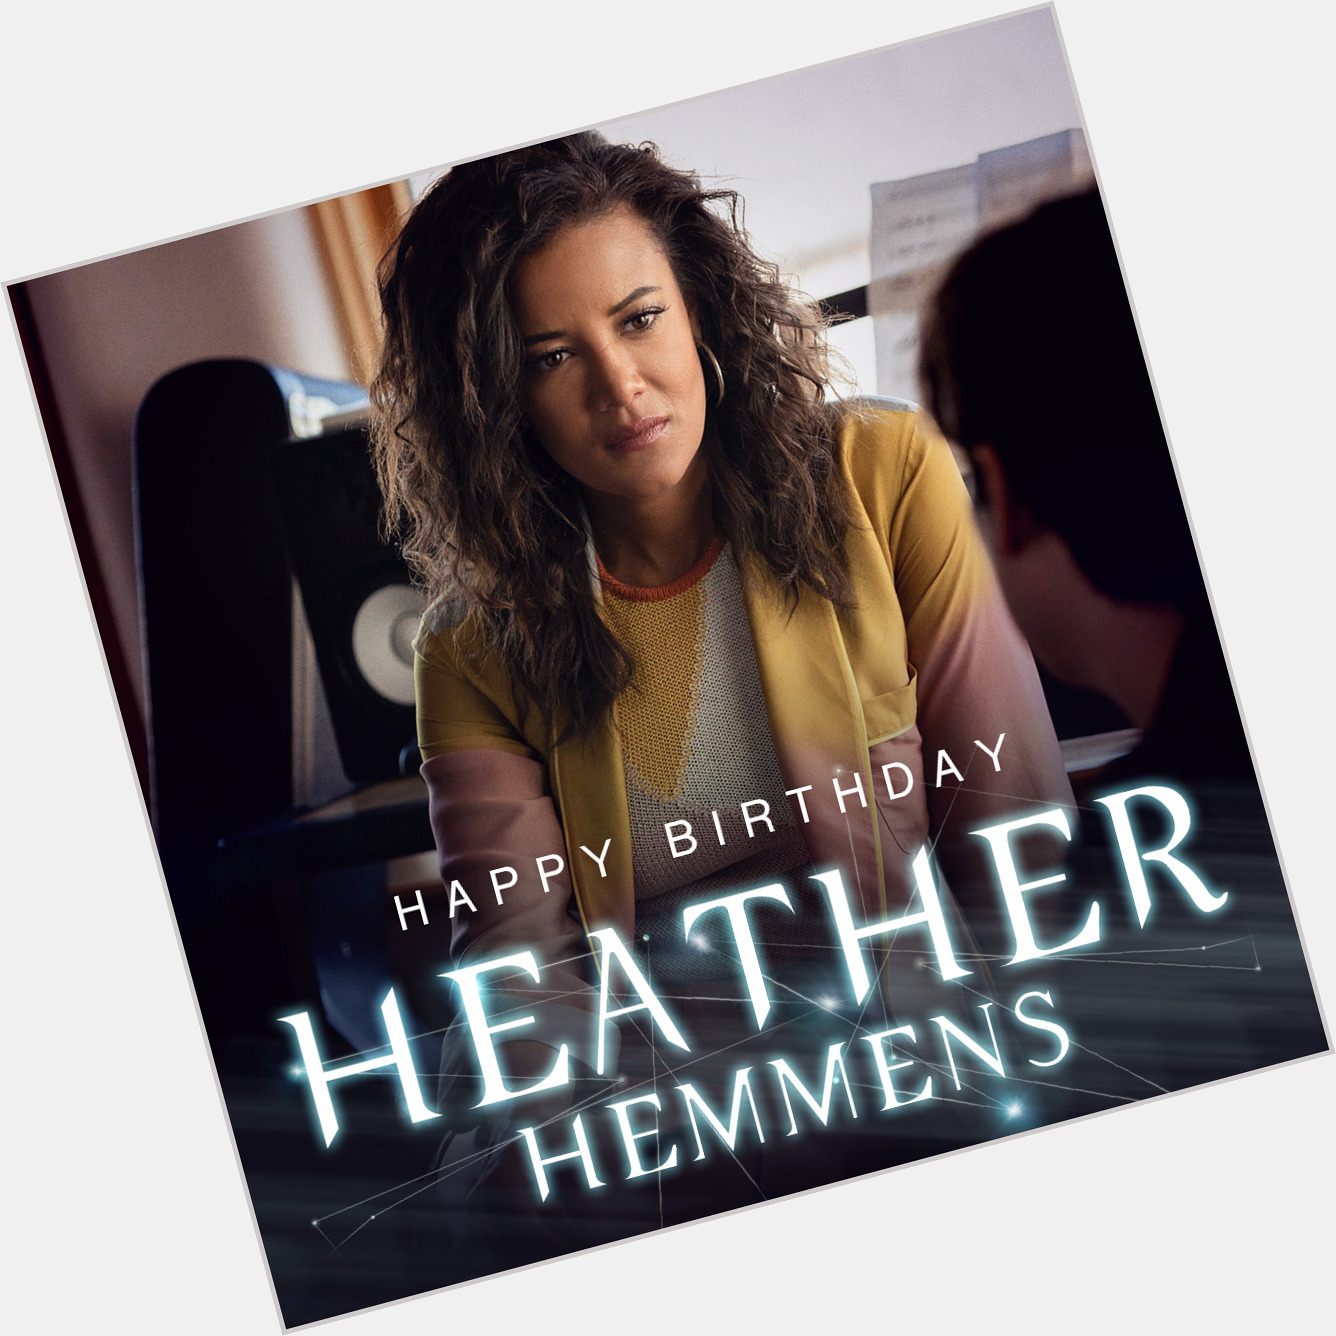 What does her future hold? Happy Birthday, Heather Hemmens! 